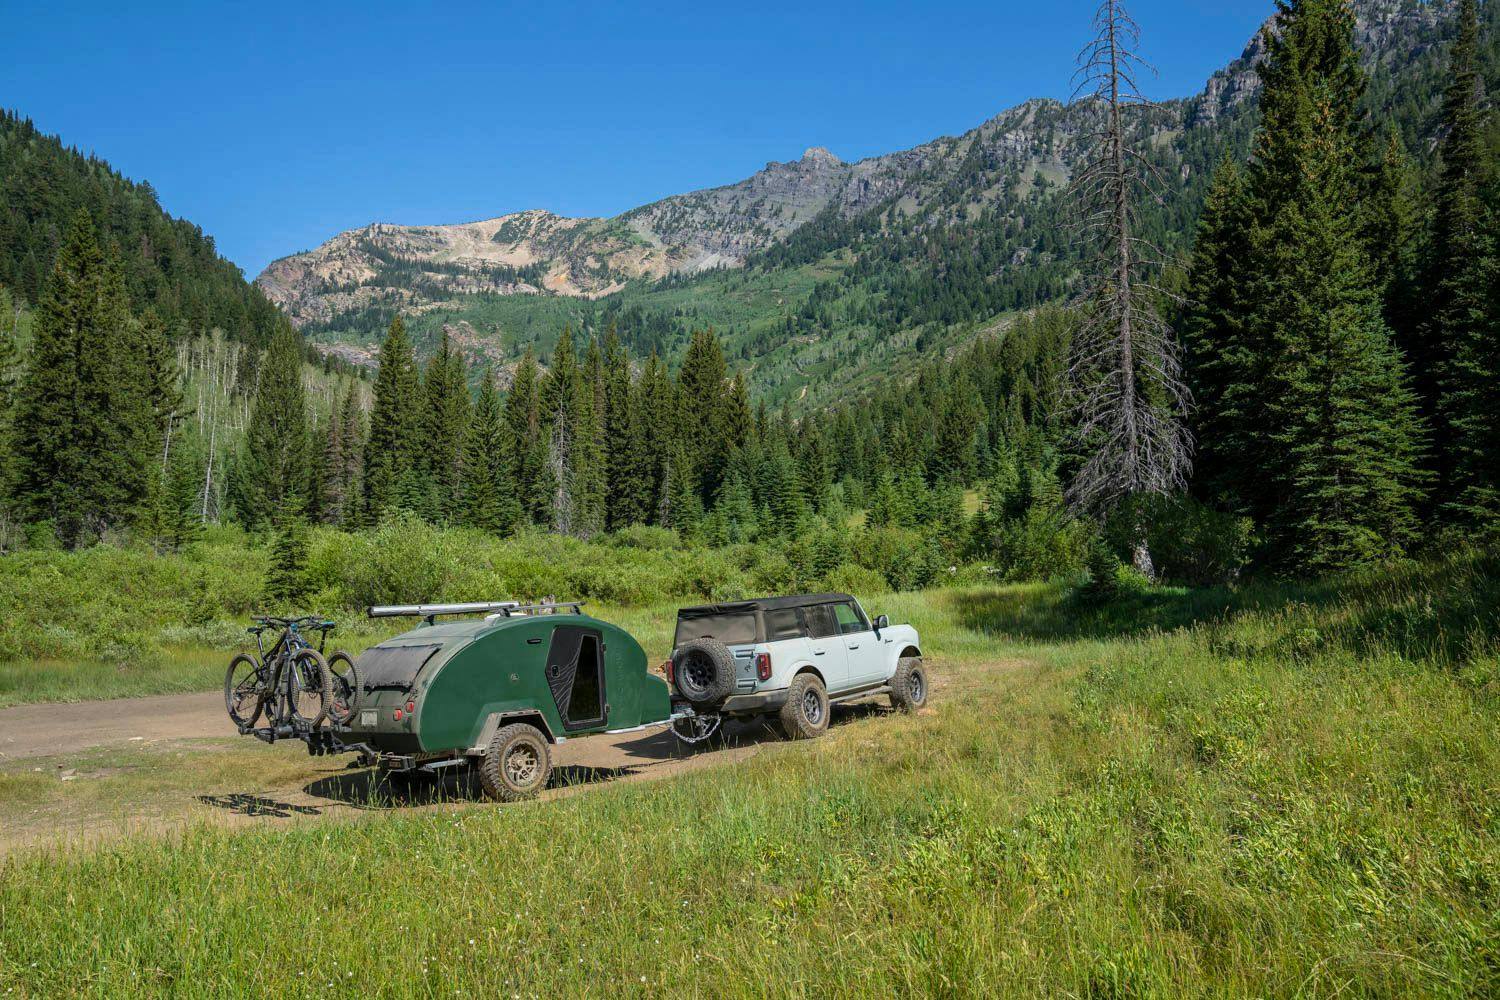 A teardrop trailer being towed by a Ford Bronco, arriving at a beatuiful campsite surround by pine trees, green grass, and mountains.